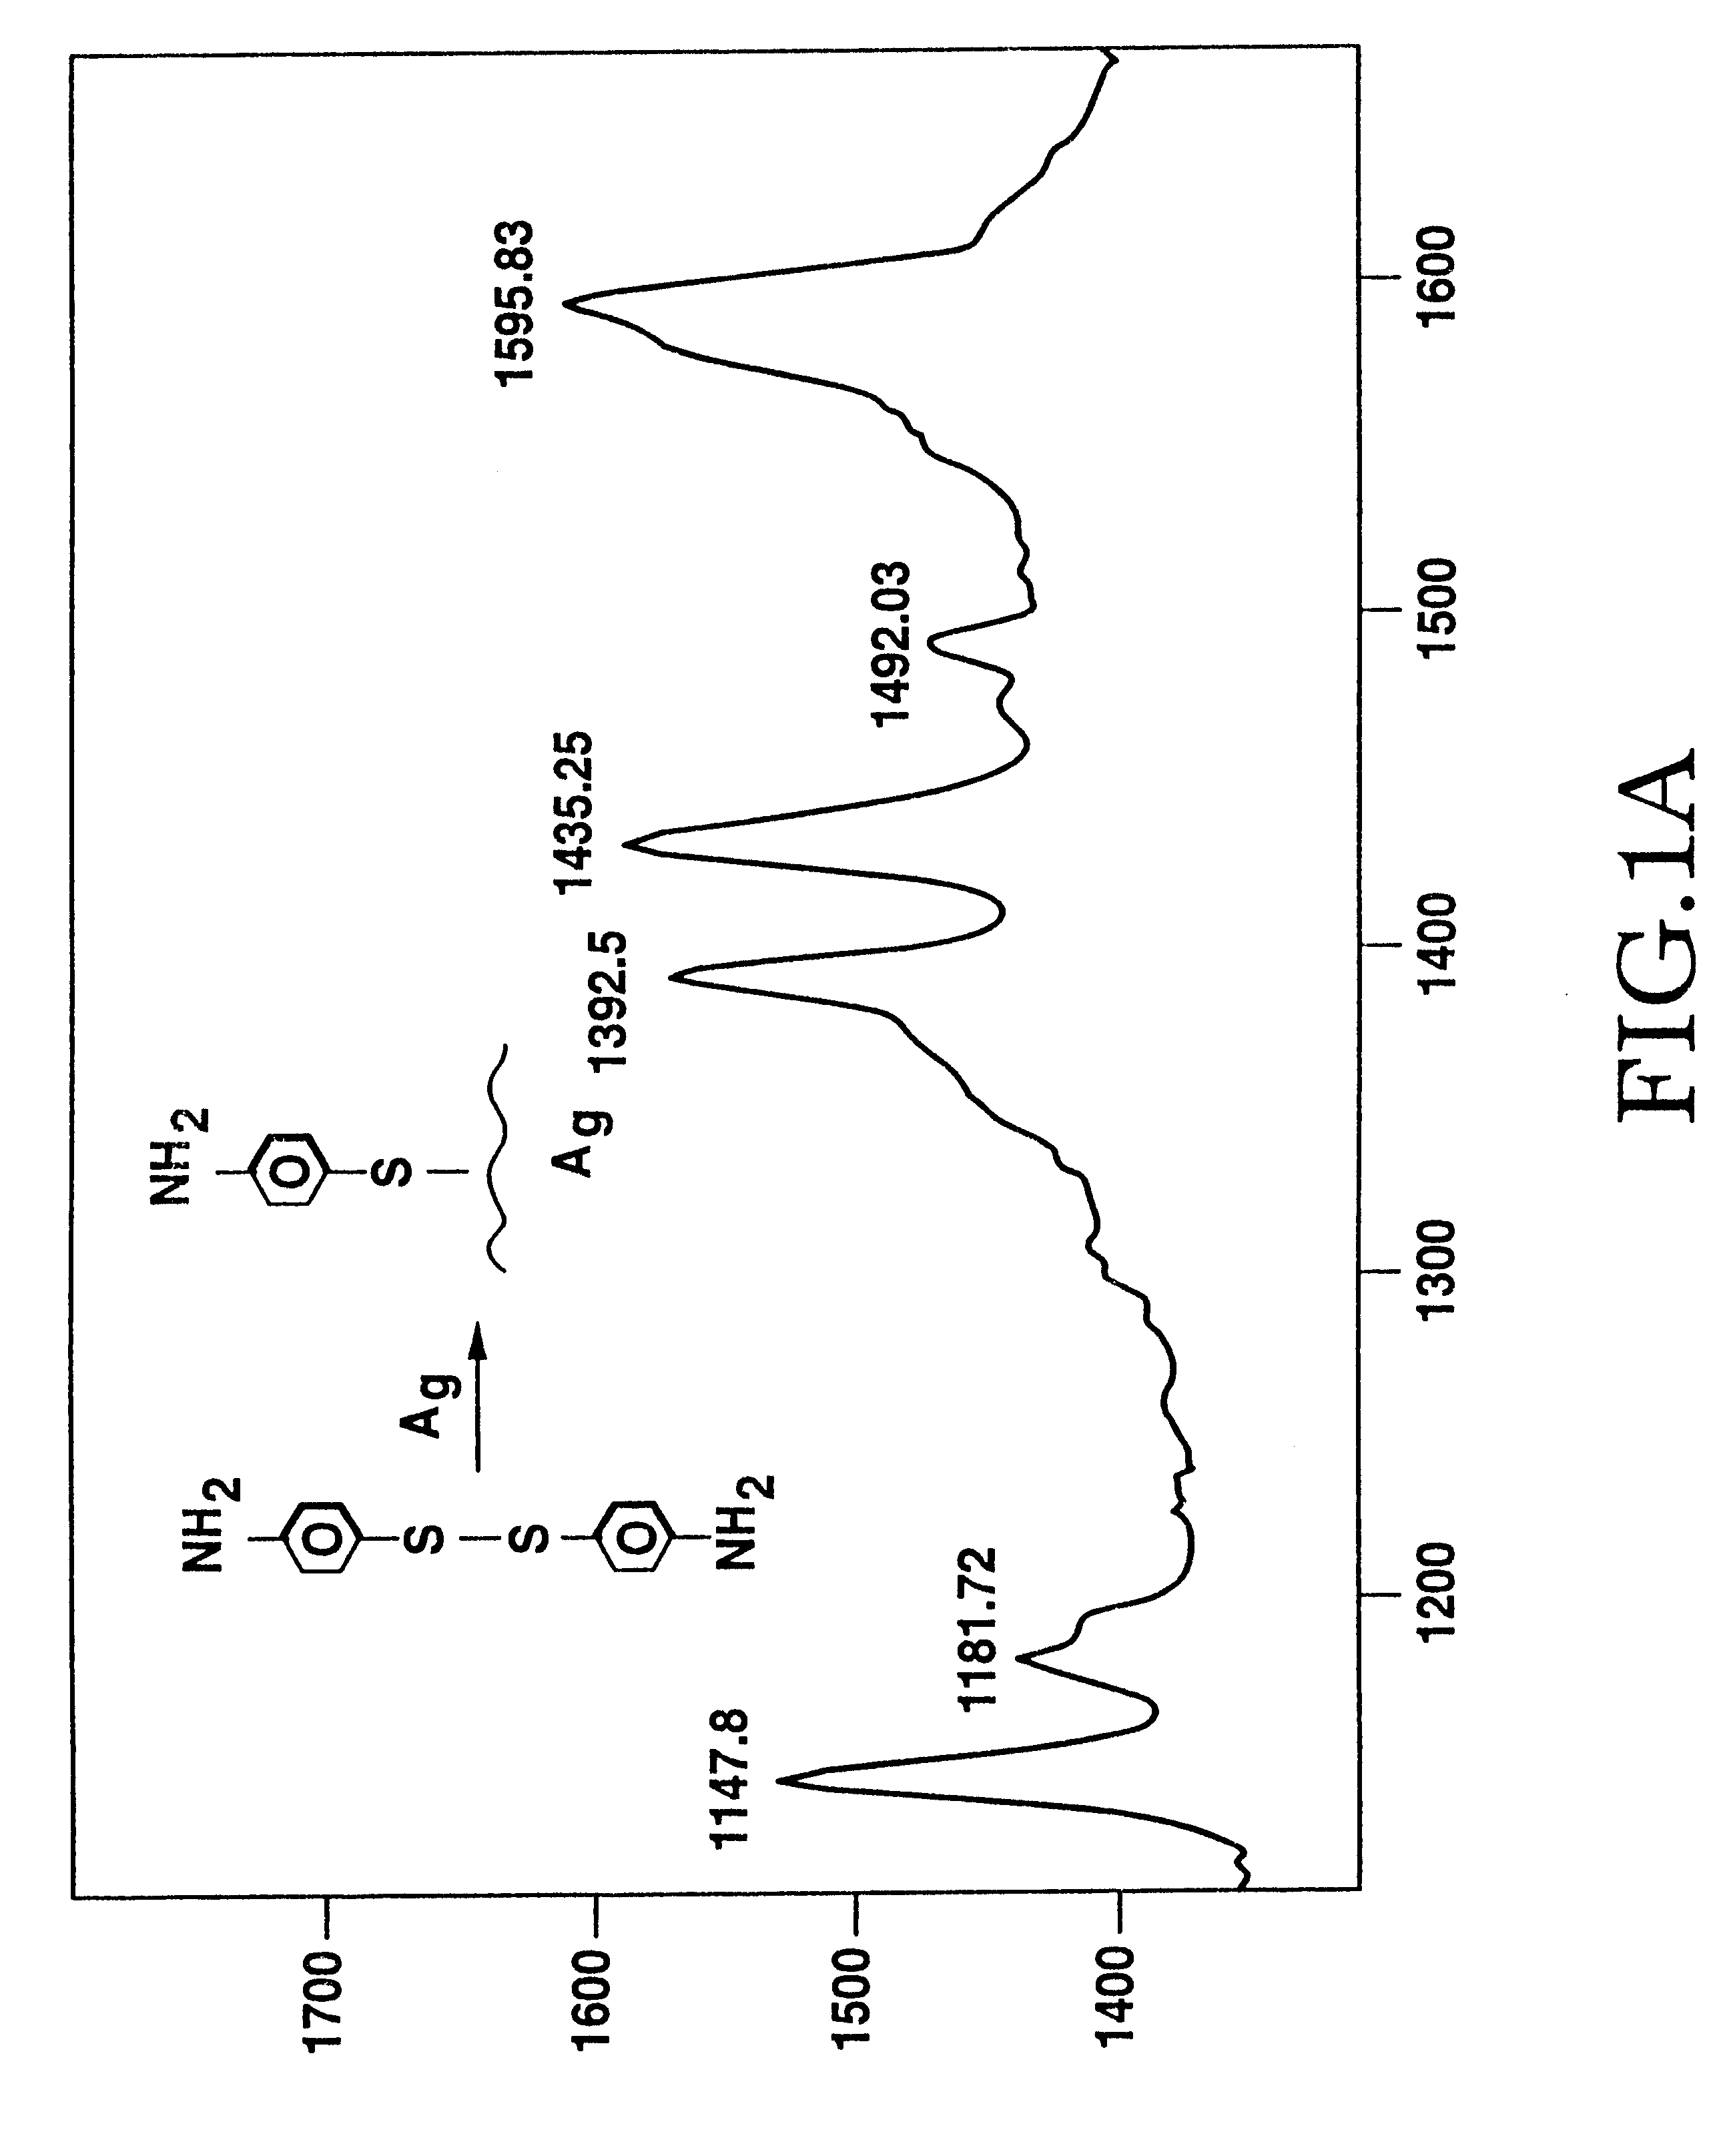 Method and apparatus for detection of a controlled substance